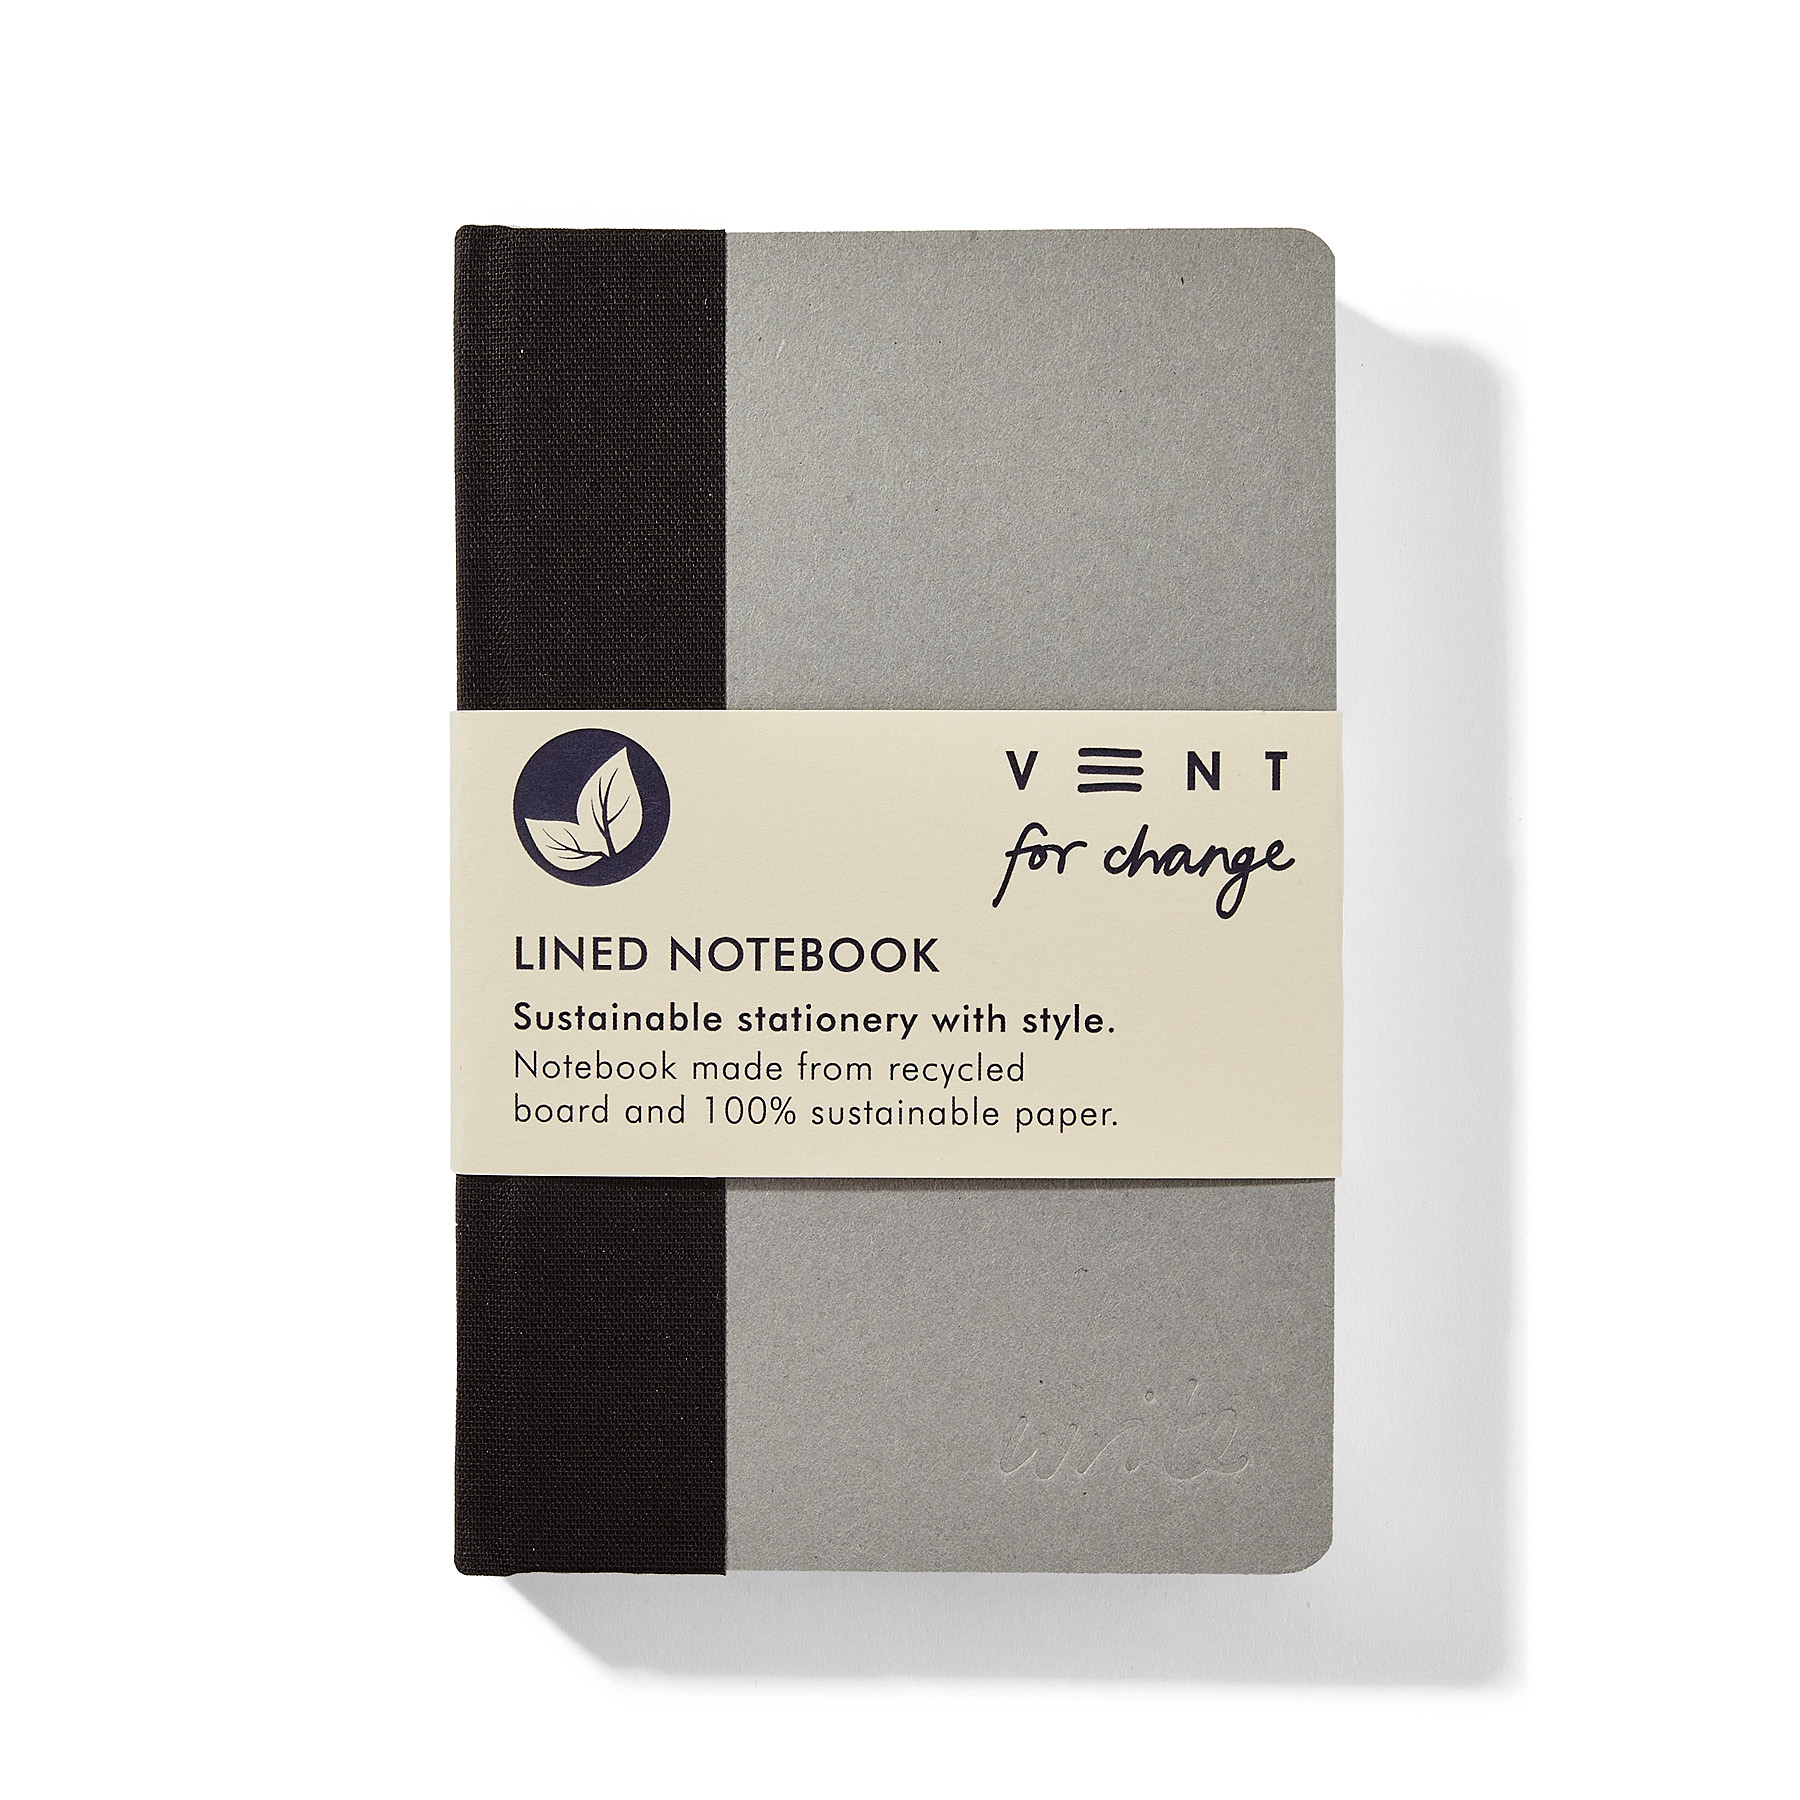 Recycled Board A6 Lined Notebook – Black fabric spine